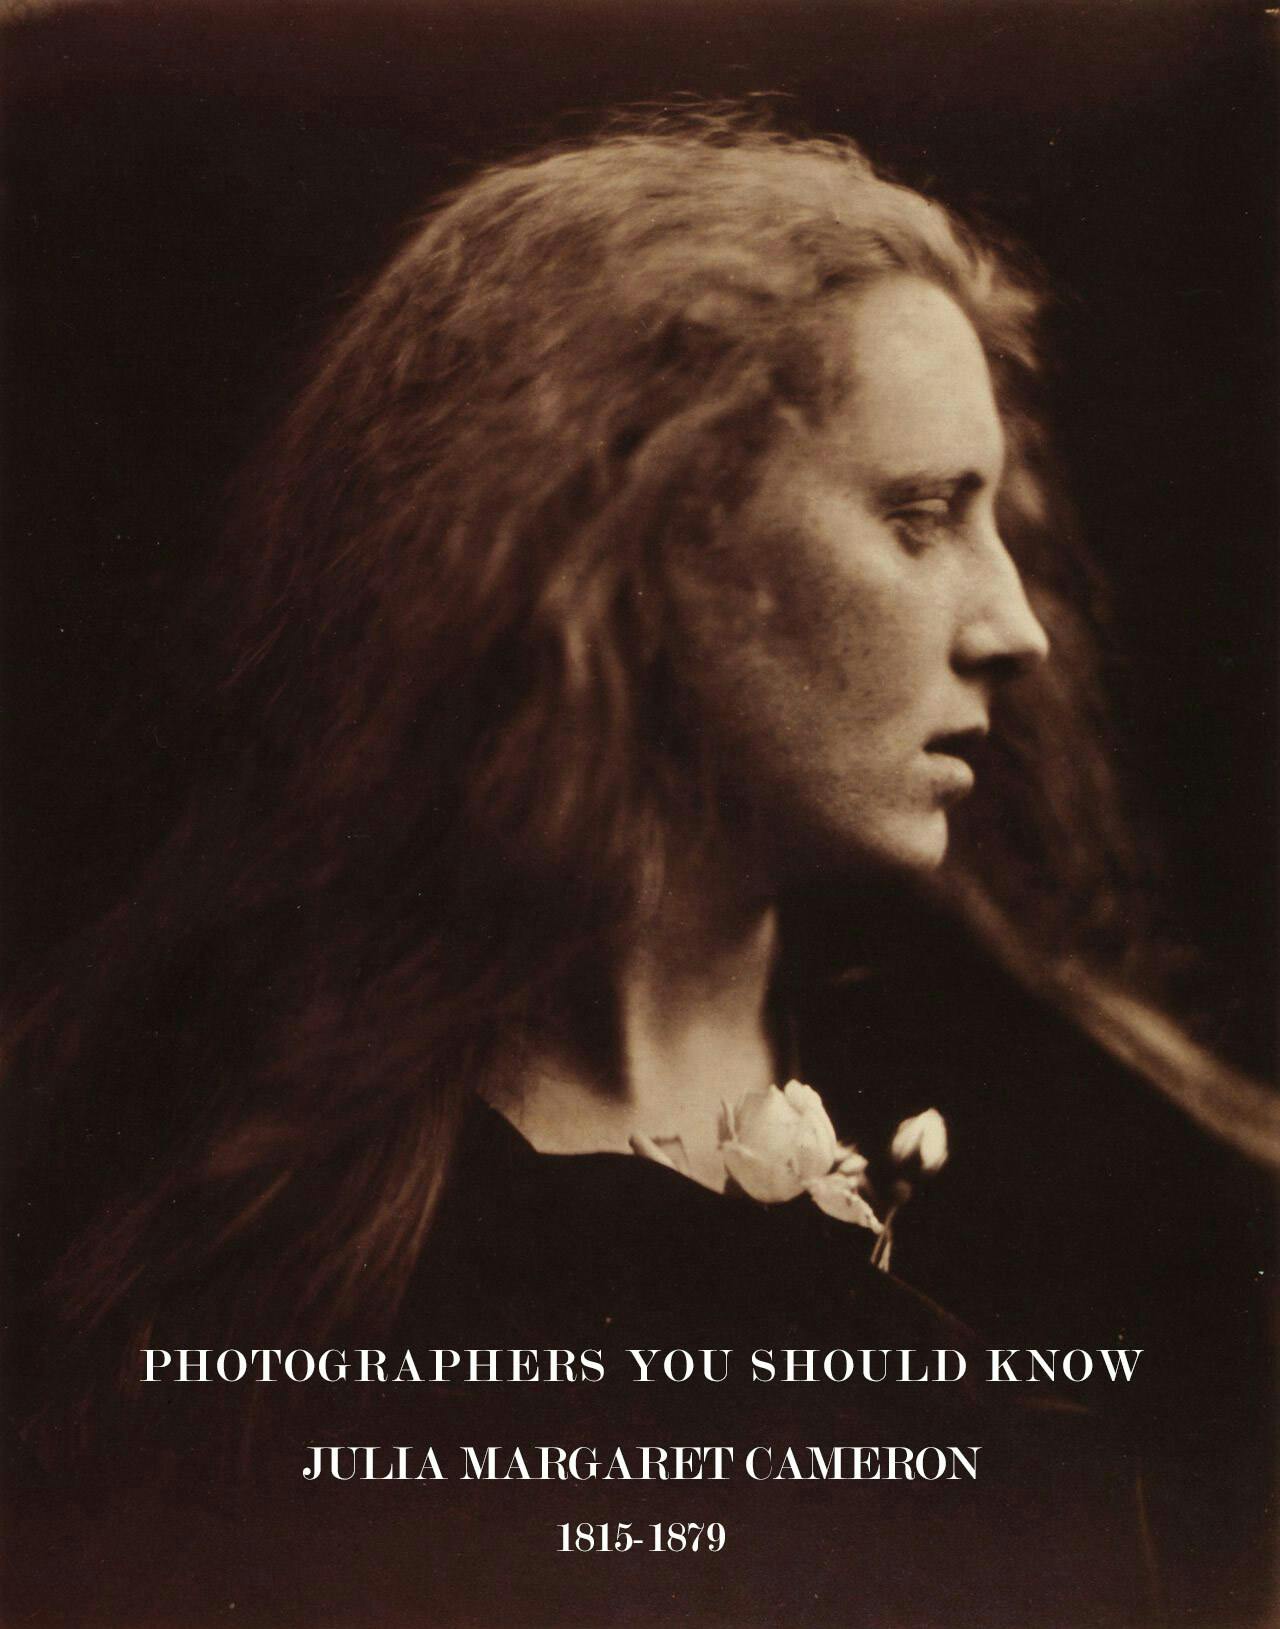 One Woman's Story: Julia Margaret Cameron's Work